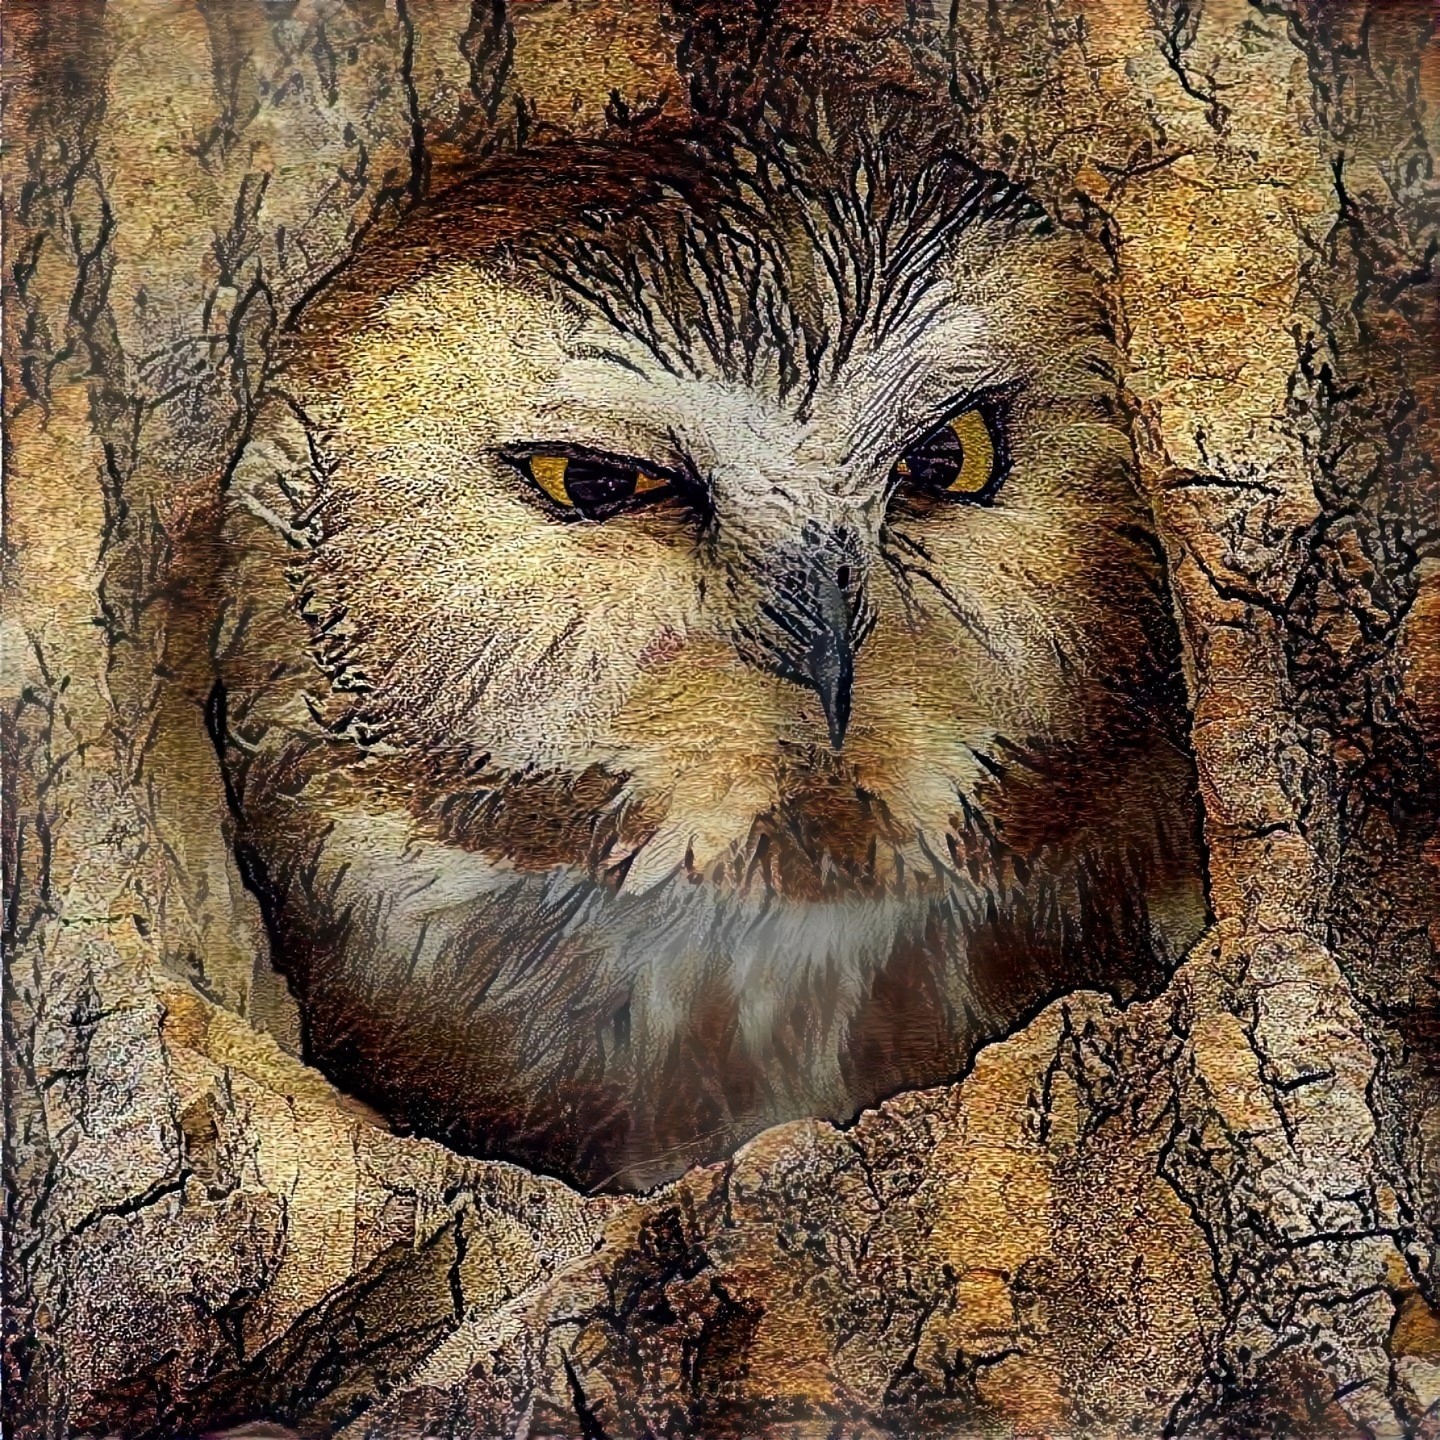 Northern saw-whet owl at home.